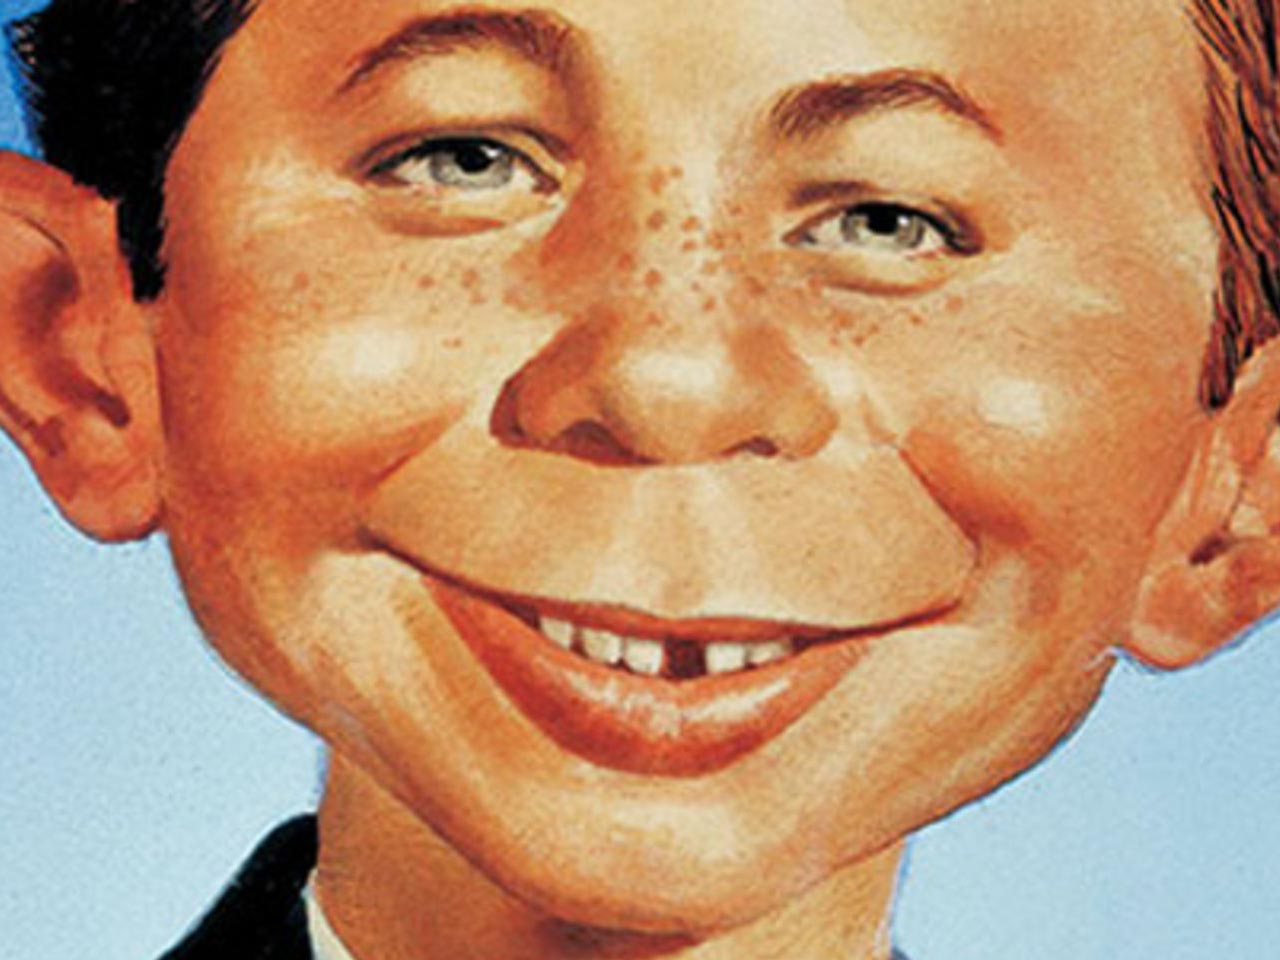 Mad magazine effectively shutting down after 67 years | The Nerdy